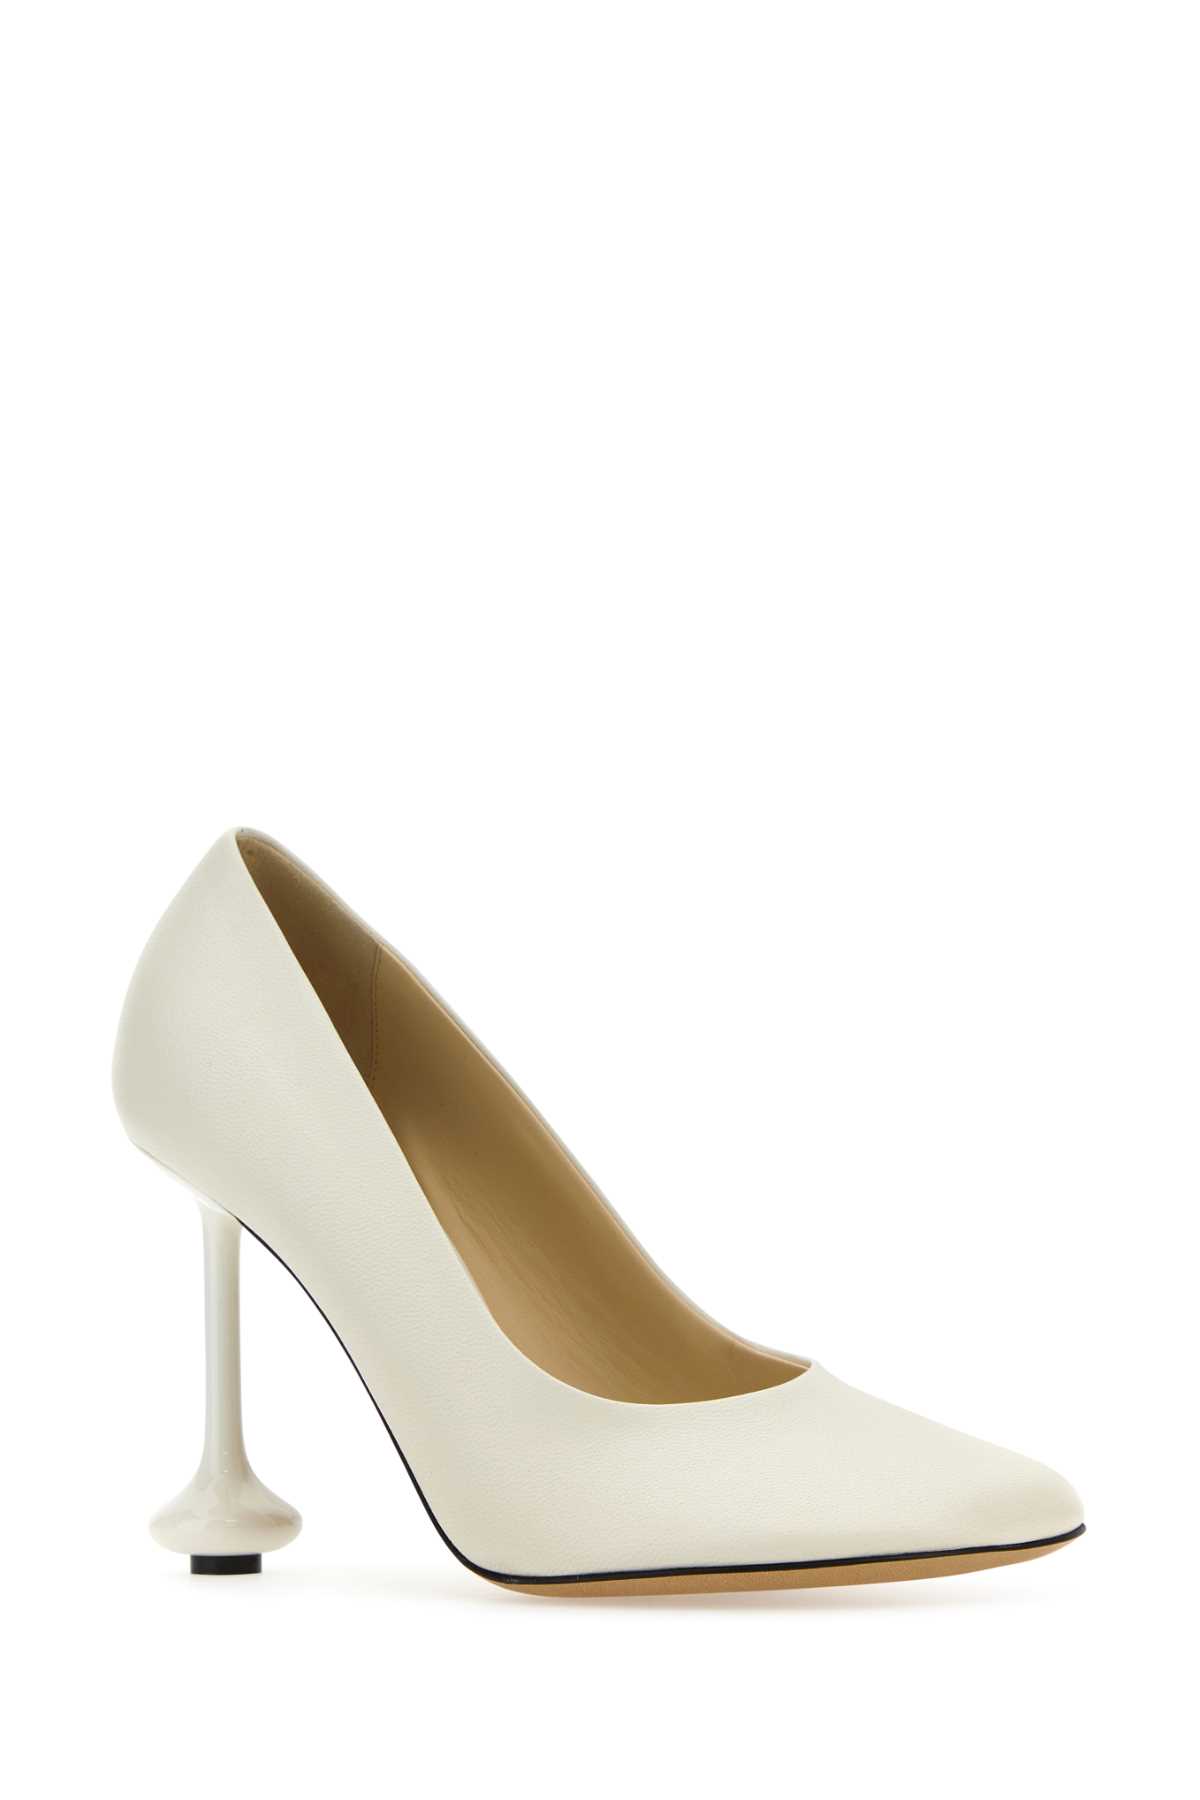 LOEWE IVORY LEATHER TOY PUMPS